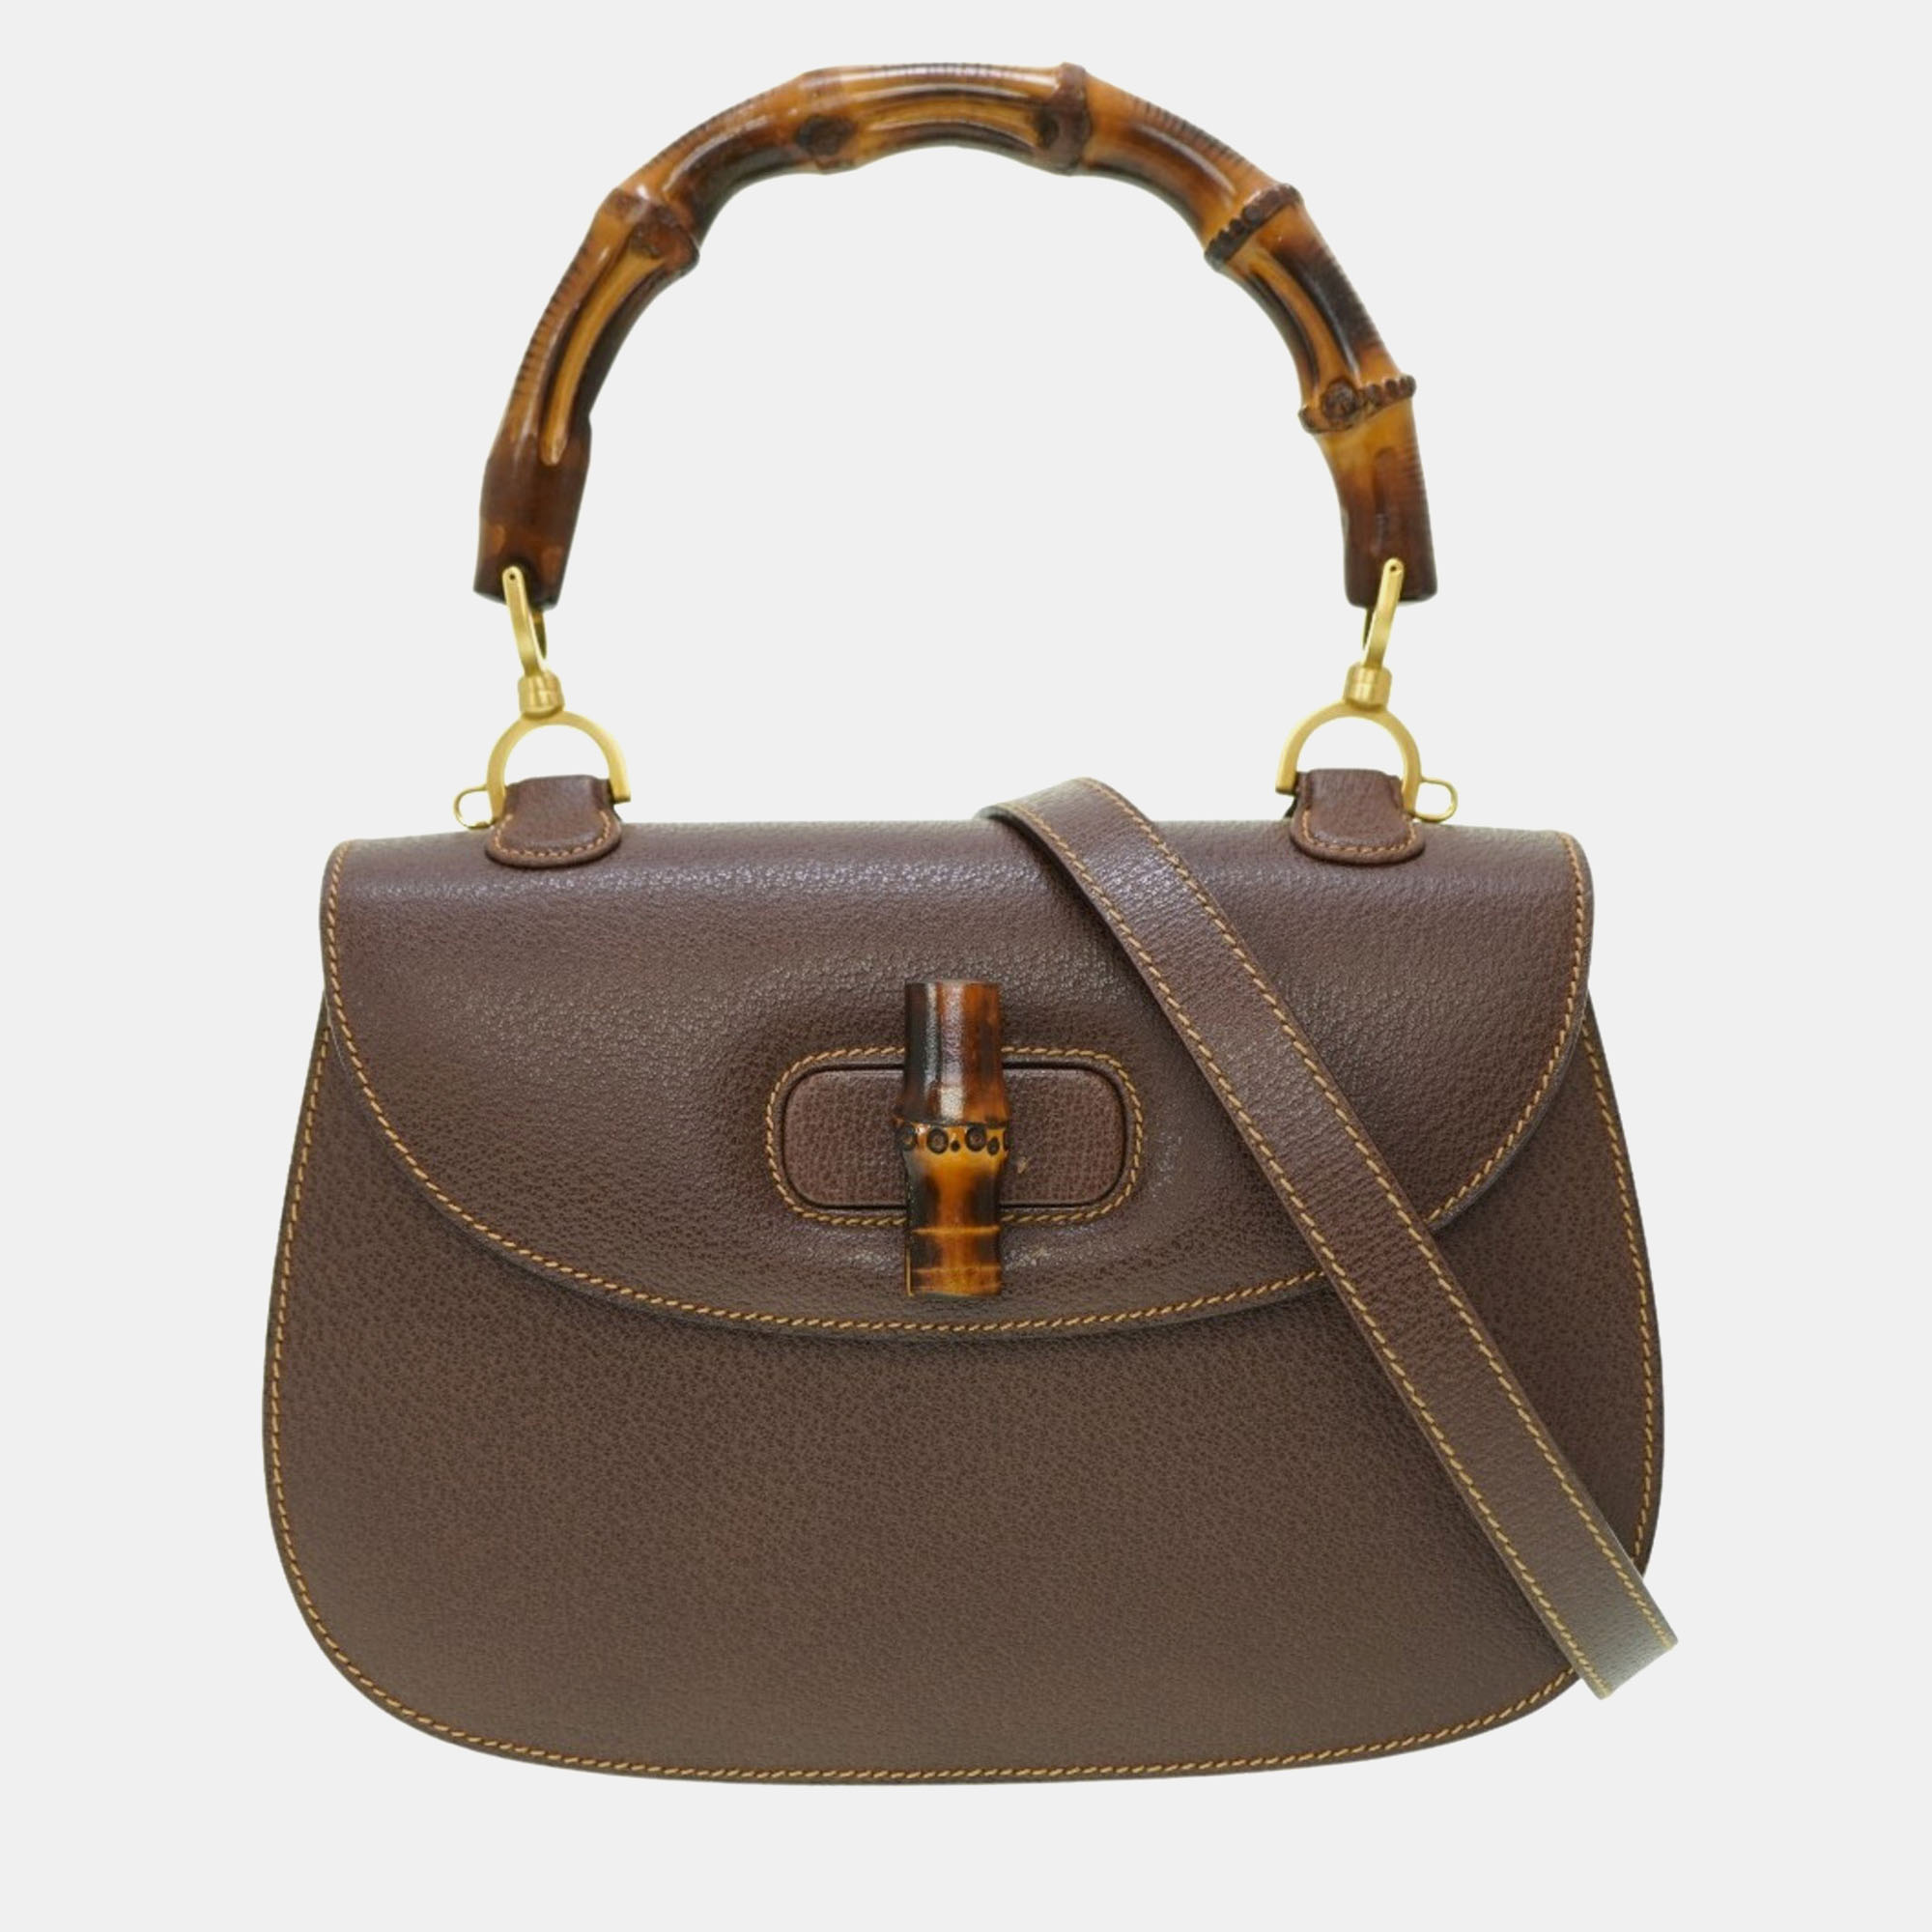 Gucci brown leather bamboo 1947 top handle bag